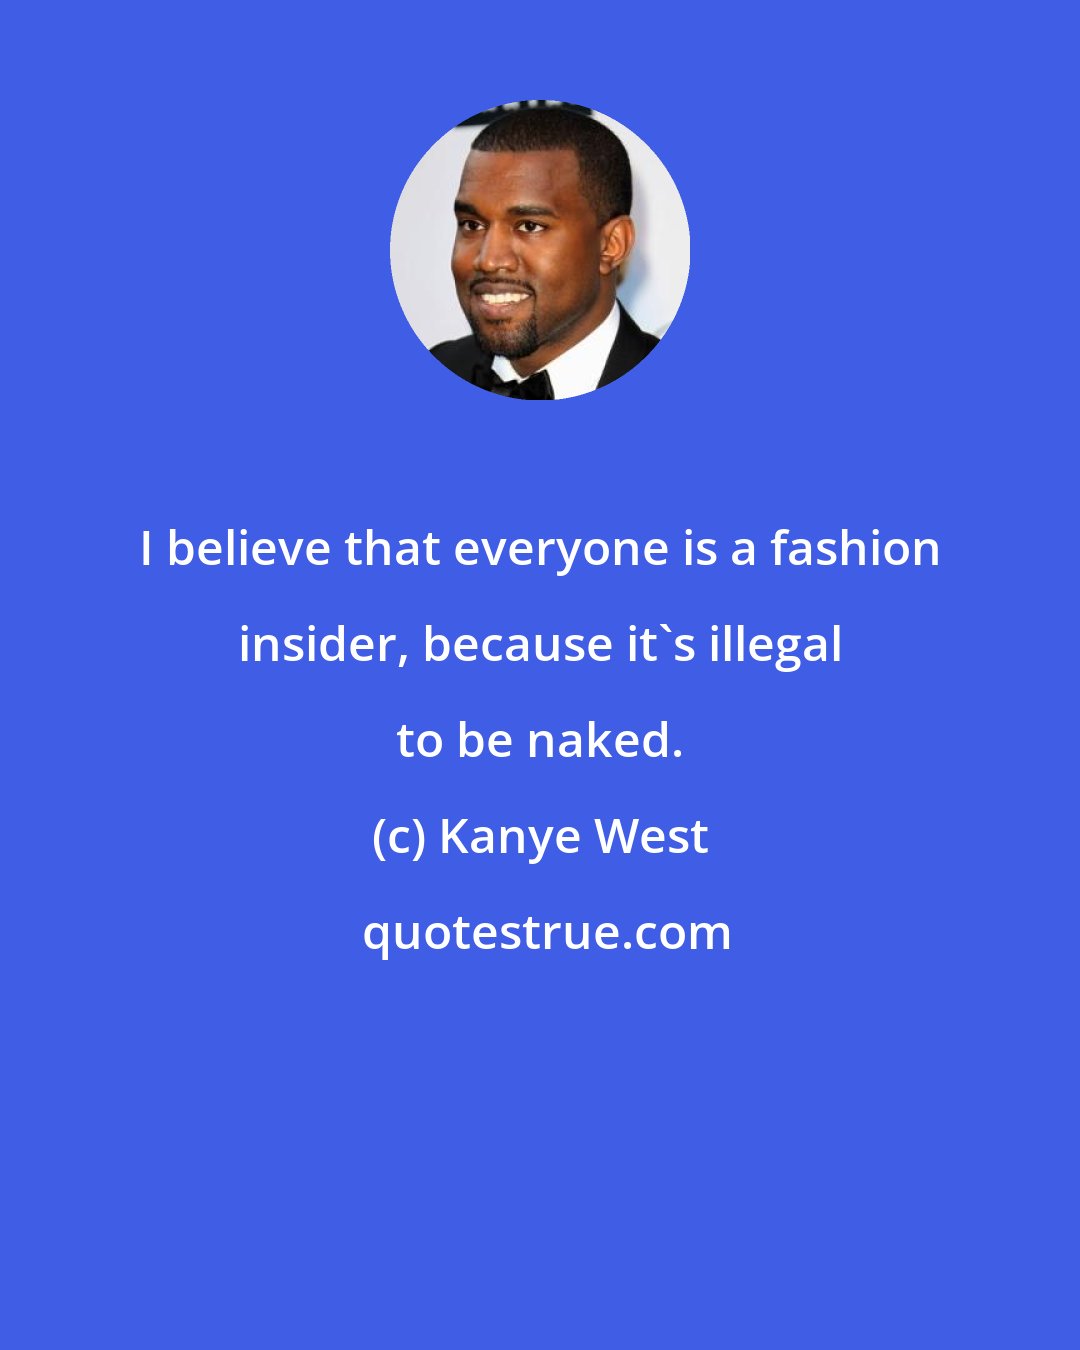 Kanye West: I believe that everyone is a fashion insider, because it's illegal to be naked.